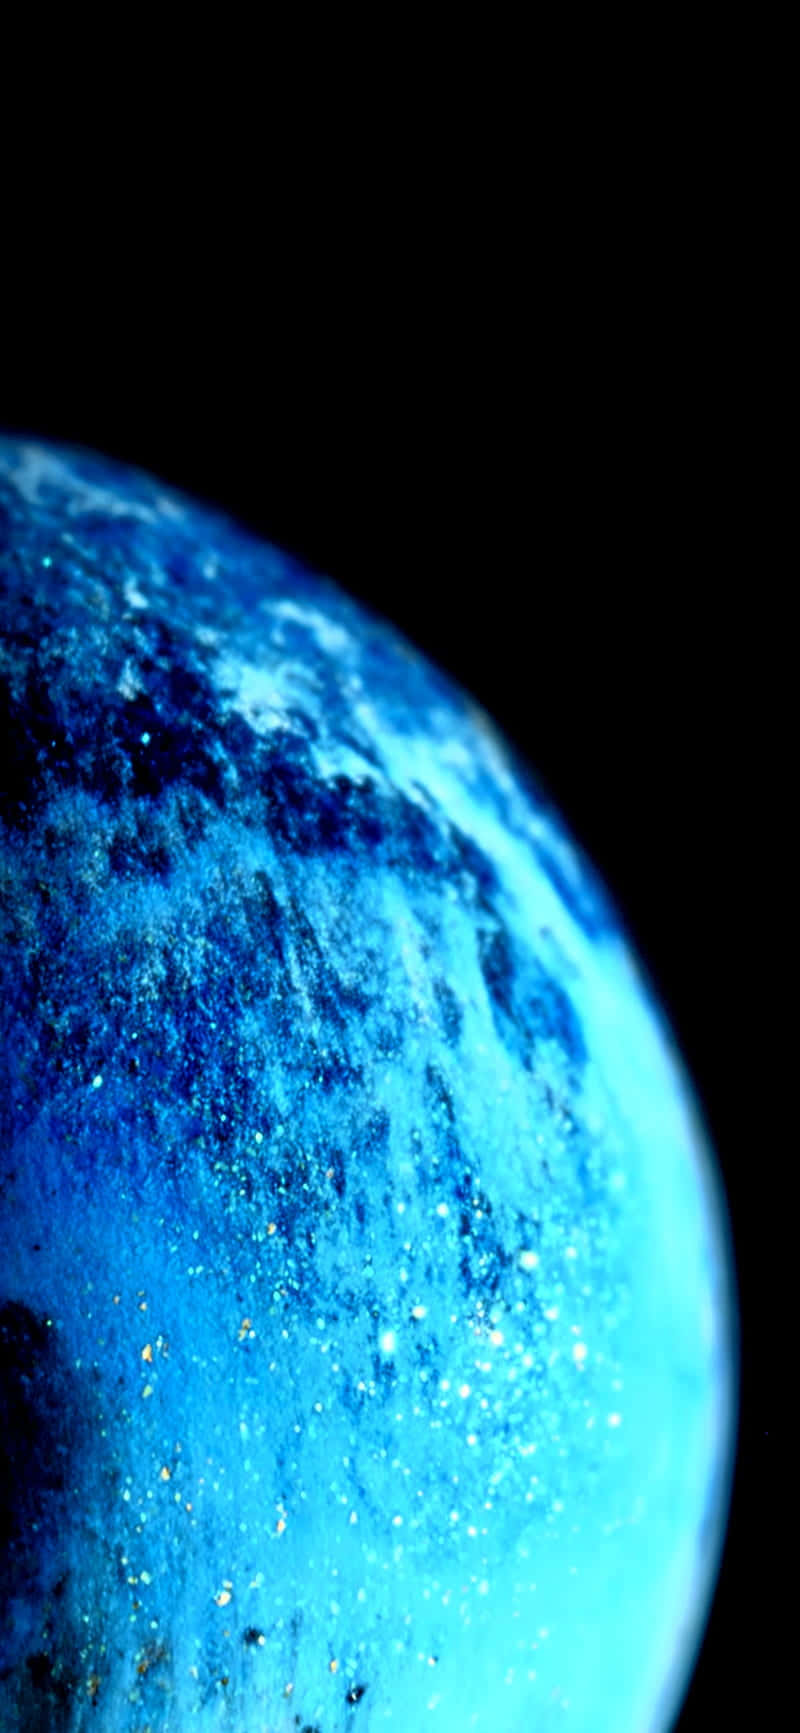 A Blue Planet With A Black Background